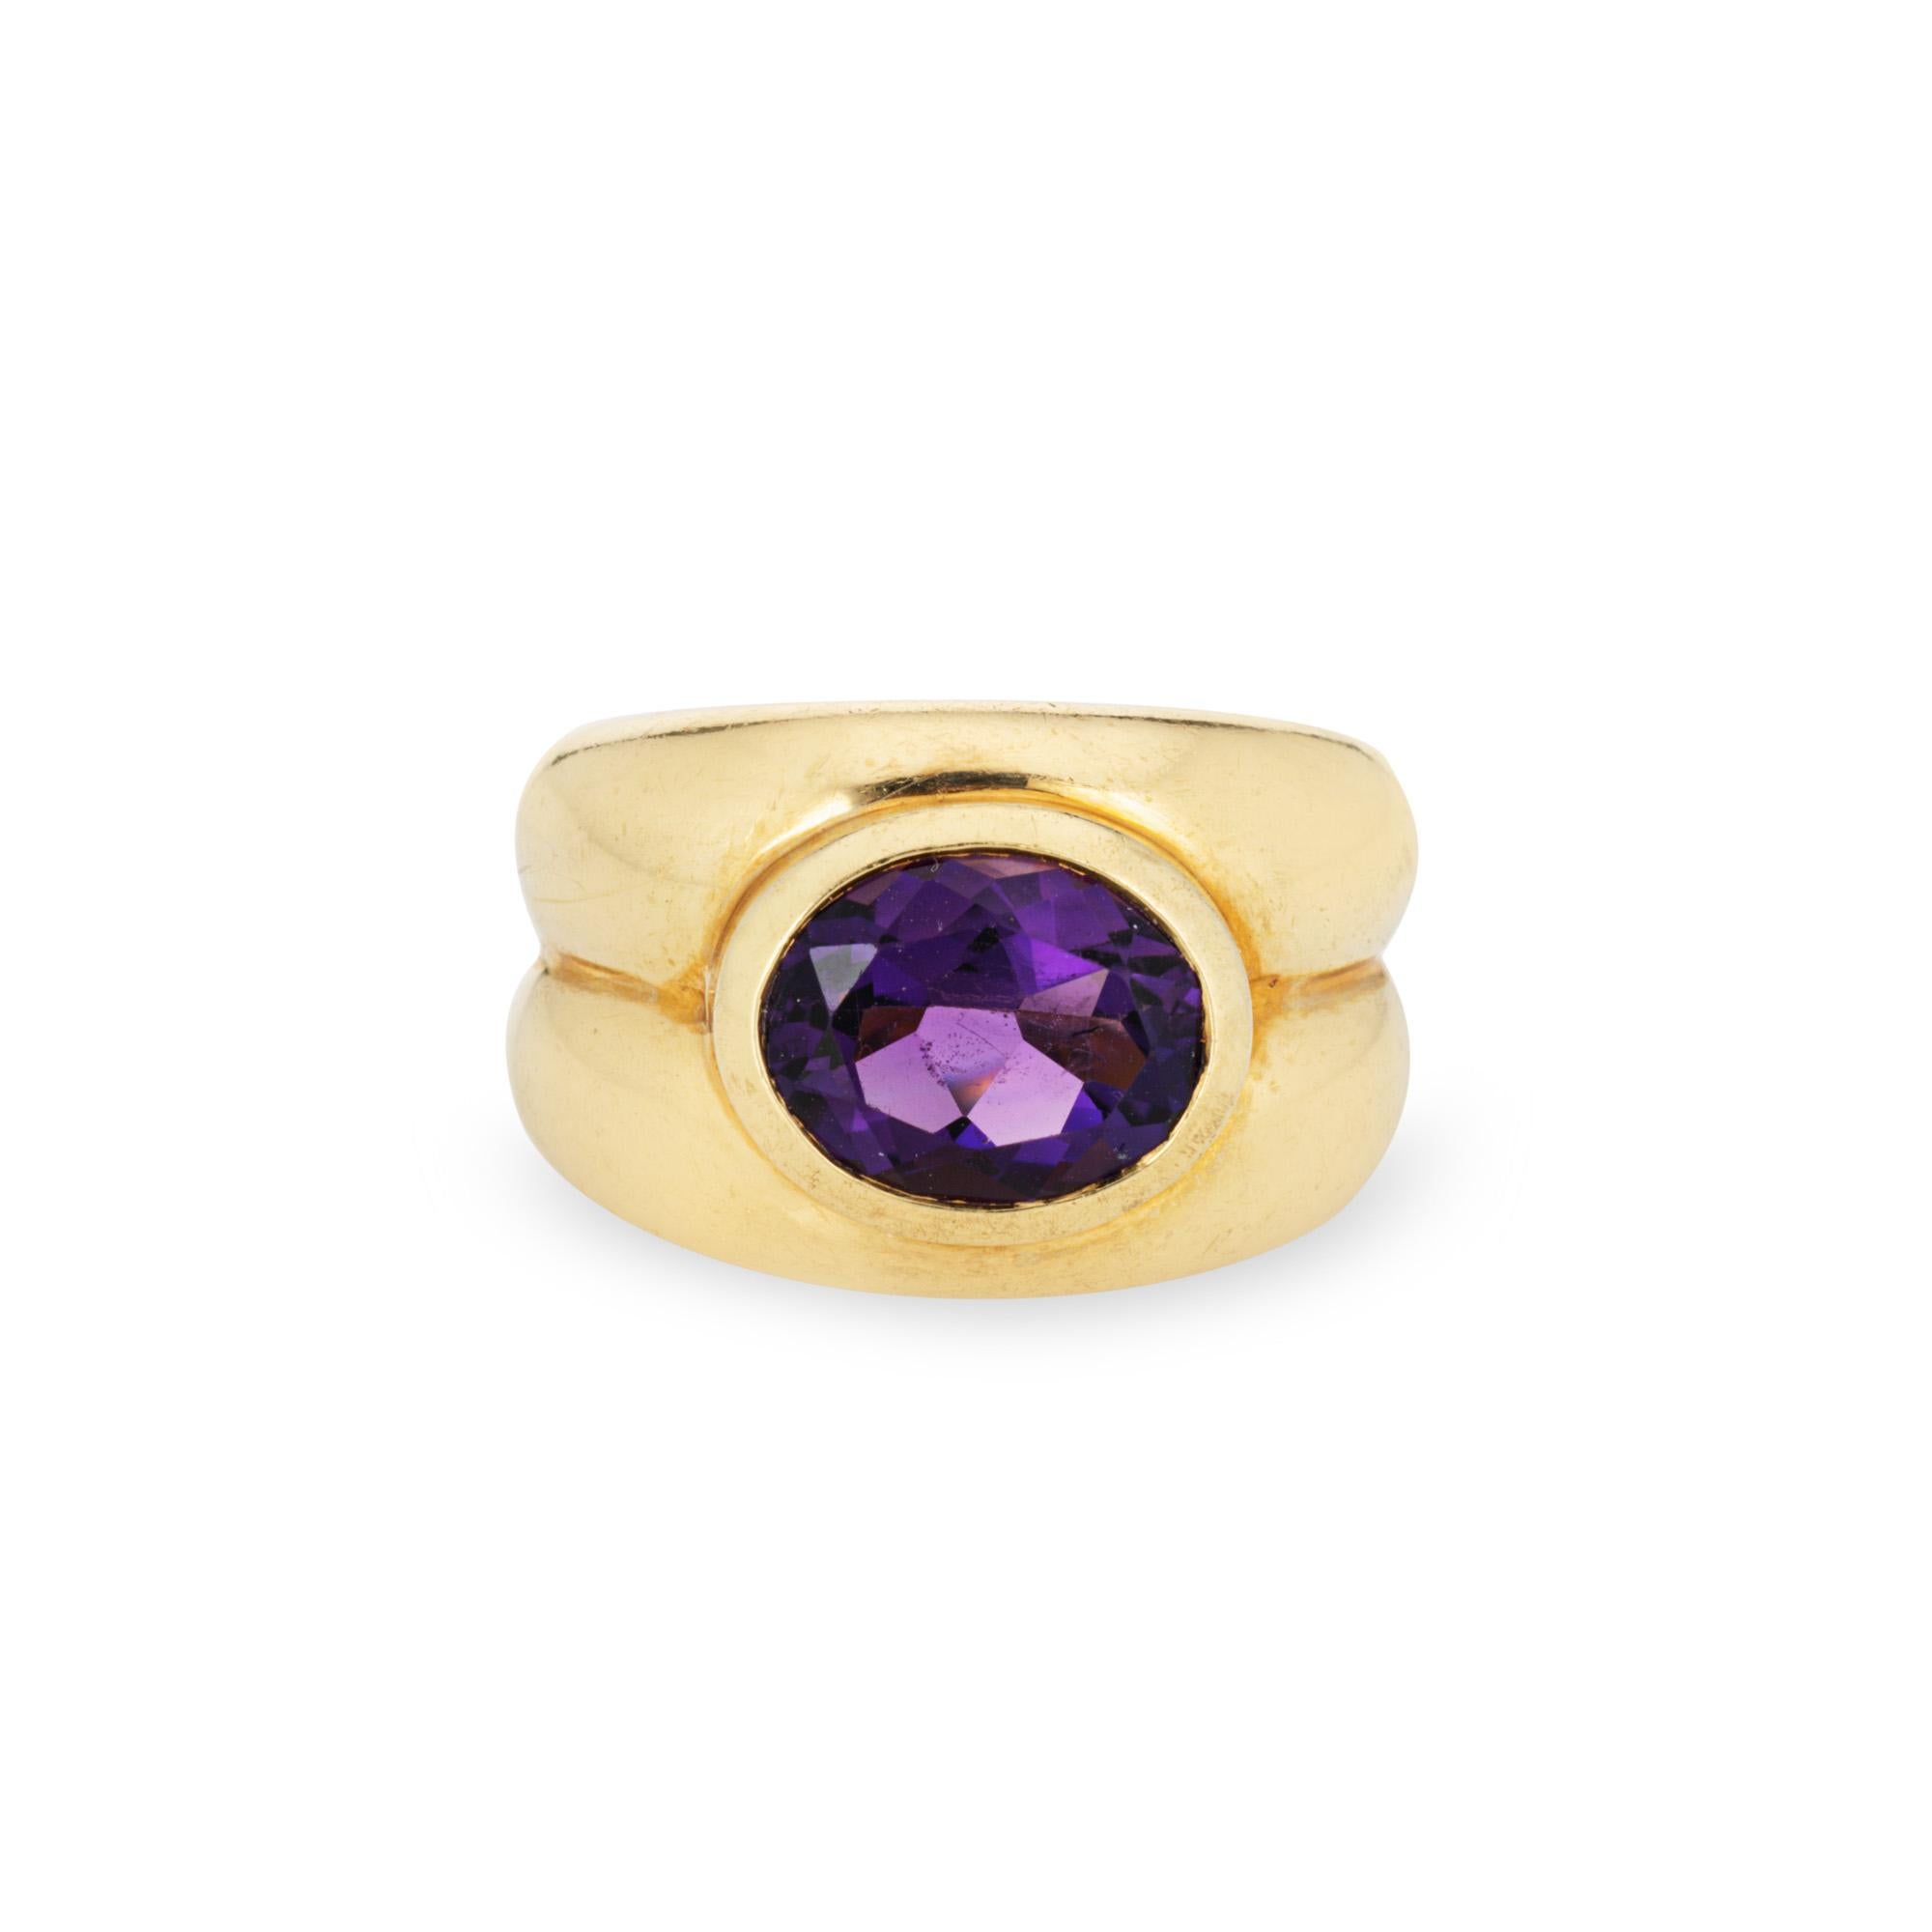 Vintage Tiffany & Co amethyst ring crafted in 18 karat yellow gold (circa 1980s).  

Faceted oval cut amethyst measures 9mm x 7.5mm. The amethyst is in good condition and free of cracks or chips. 

The wide band is set with a rich royal purple bezel